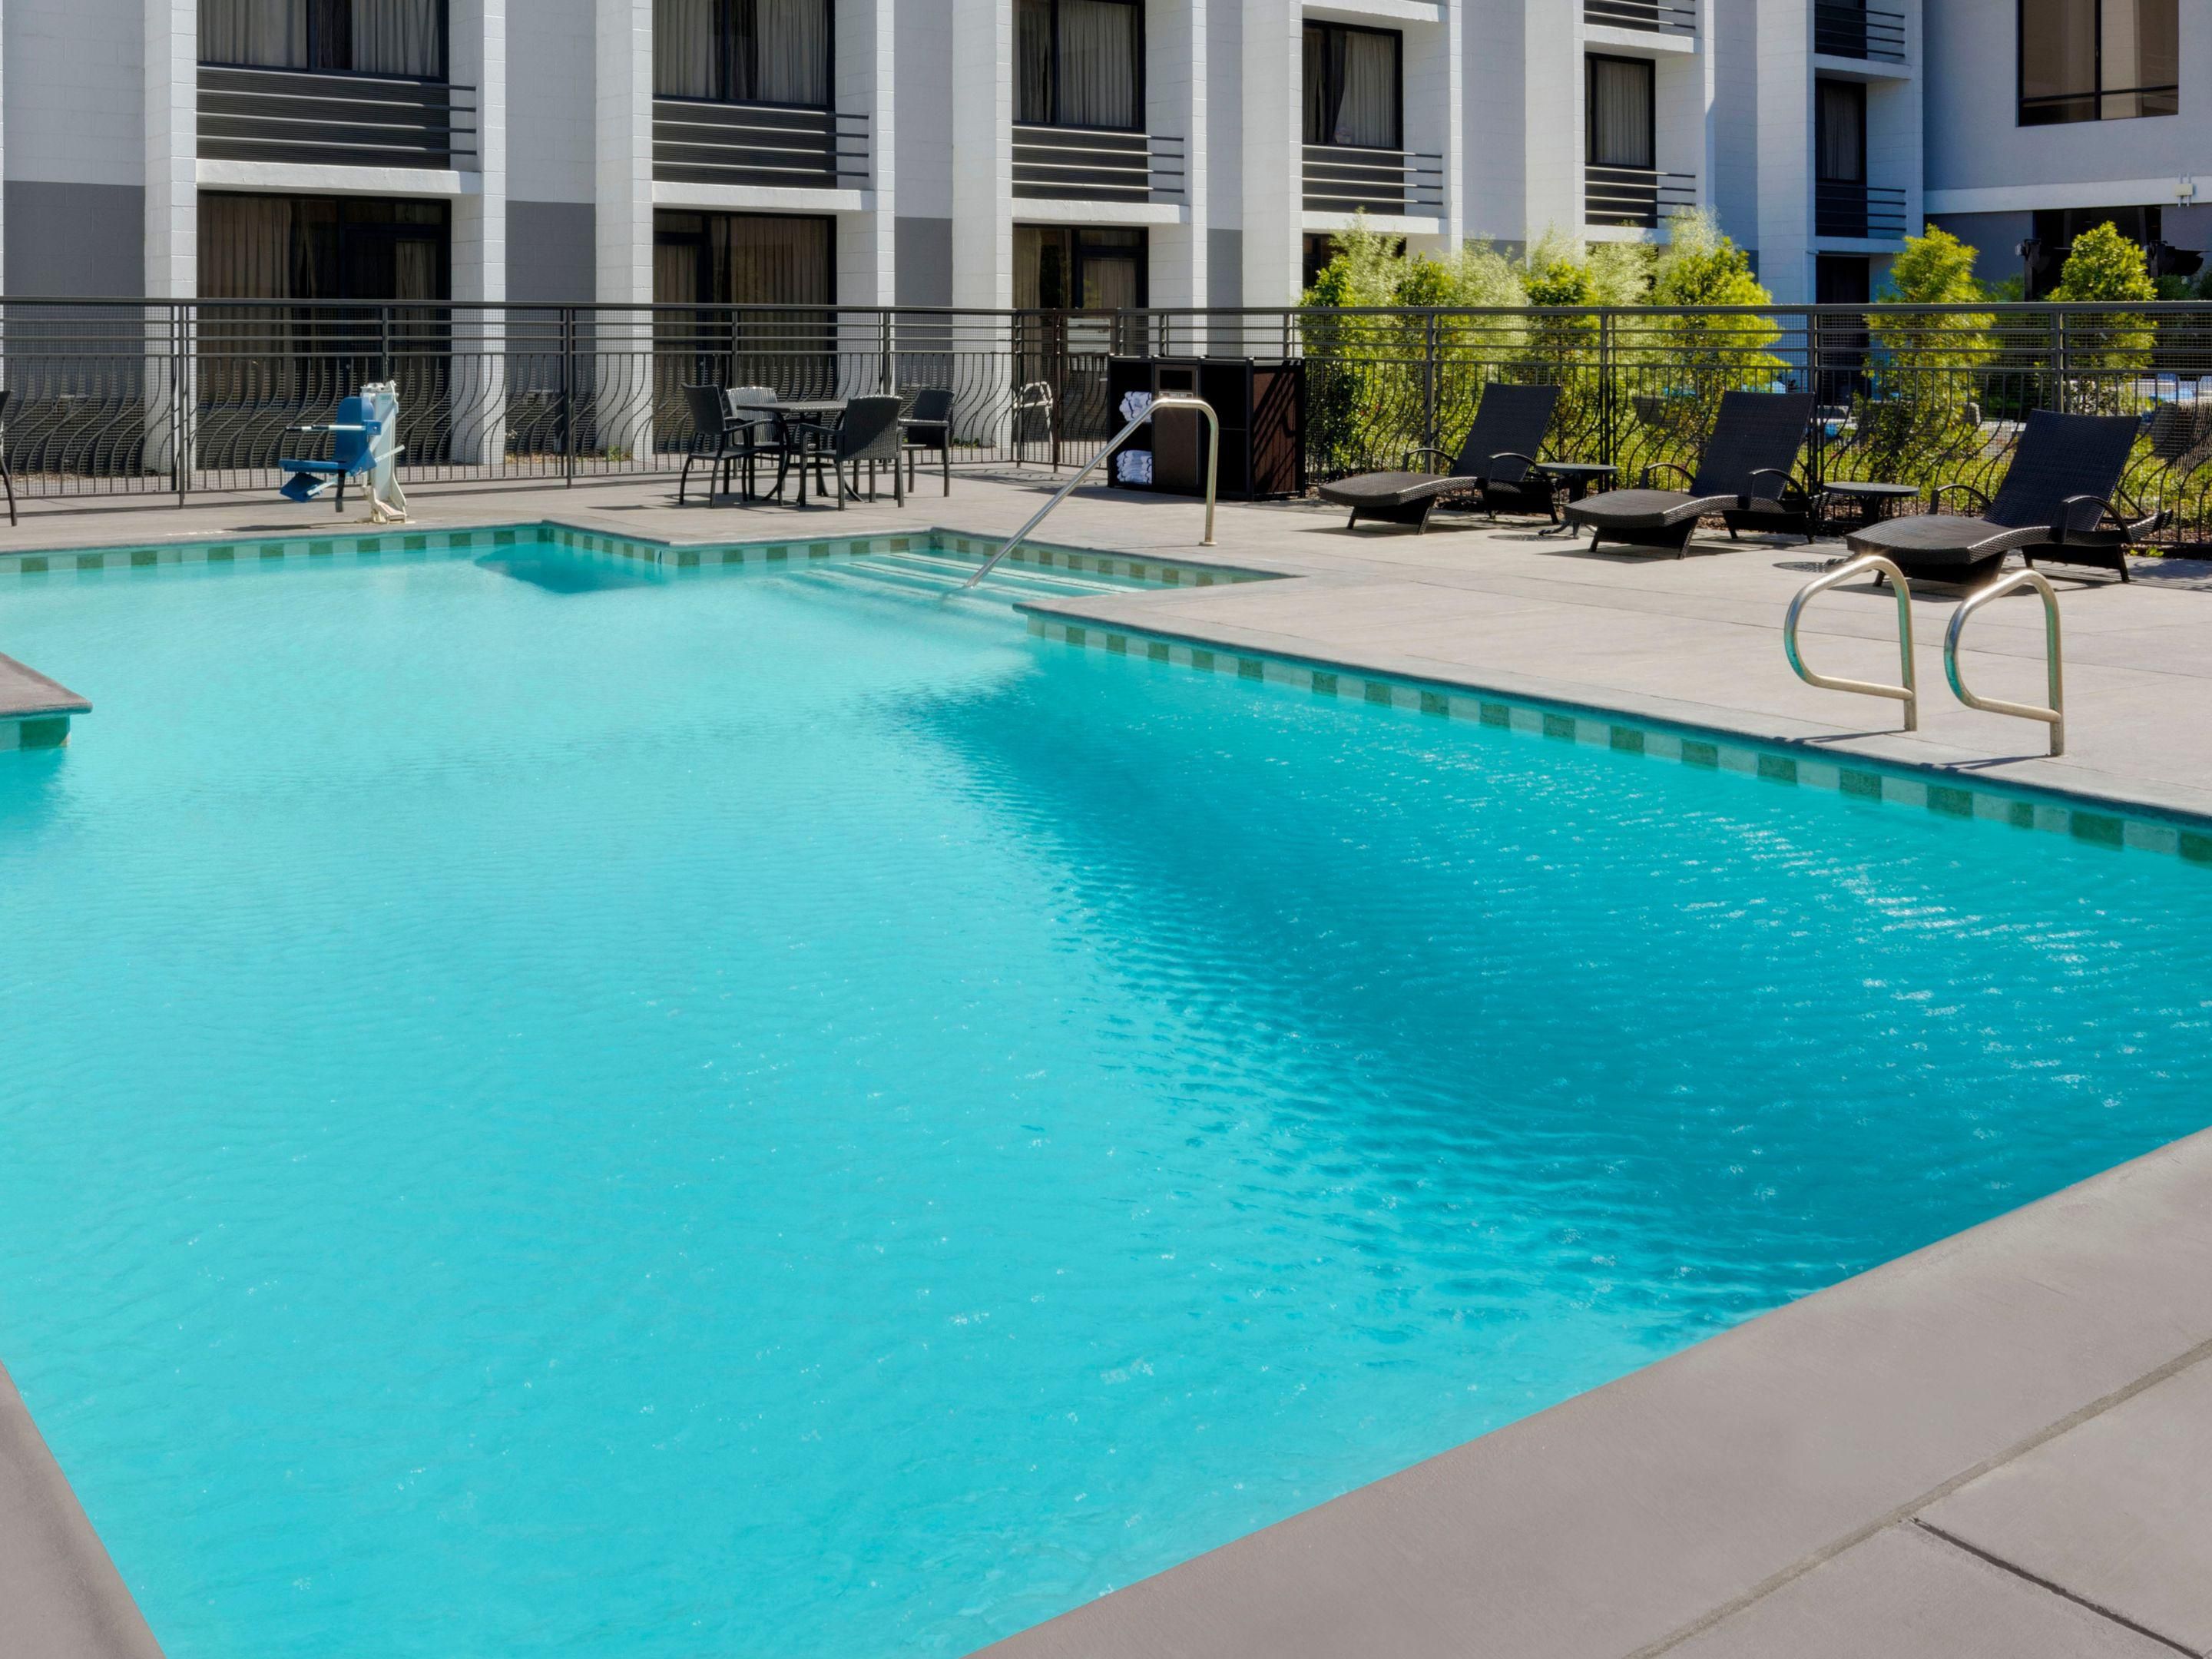 Bask in the California Sunshine on a lounge chair or take a a refreshing dip in our pool.  